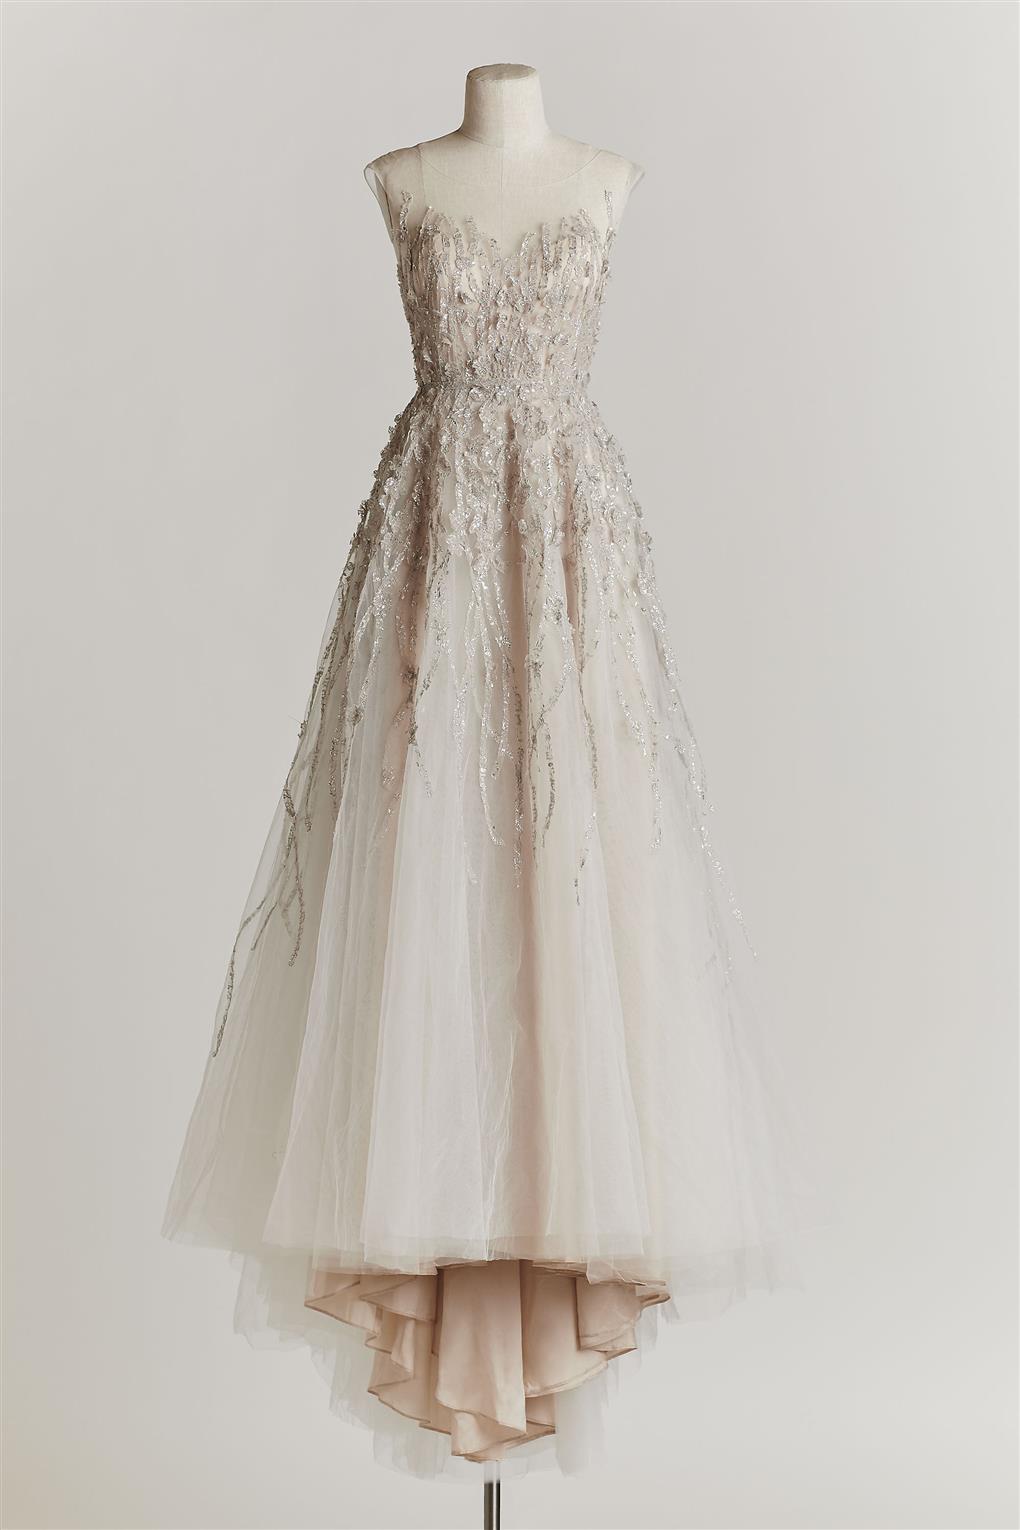 Wisteria Wedding Dress from BHLDN's Spring 2015 Bridal Collection